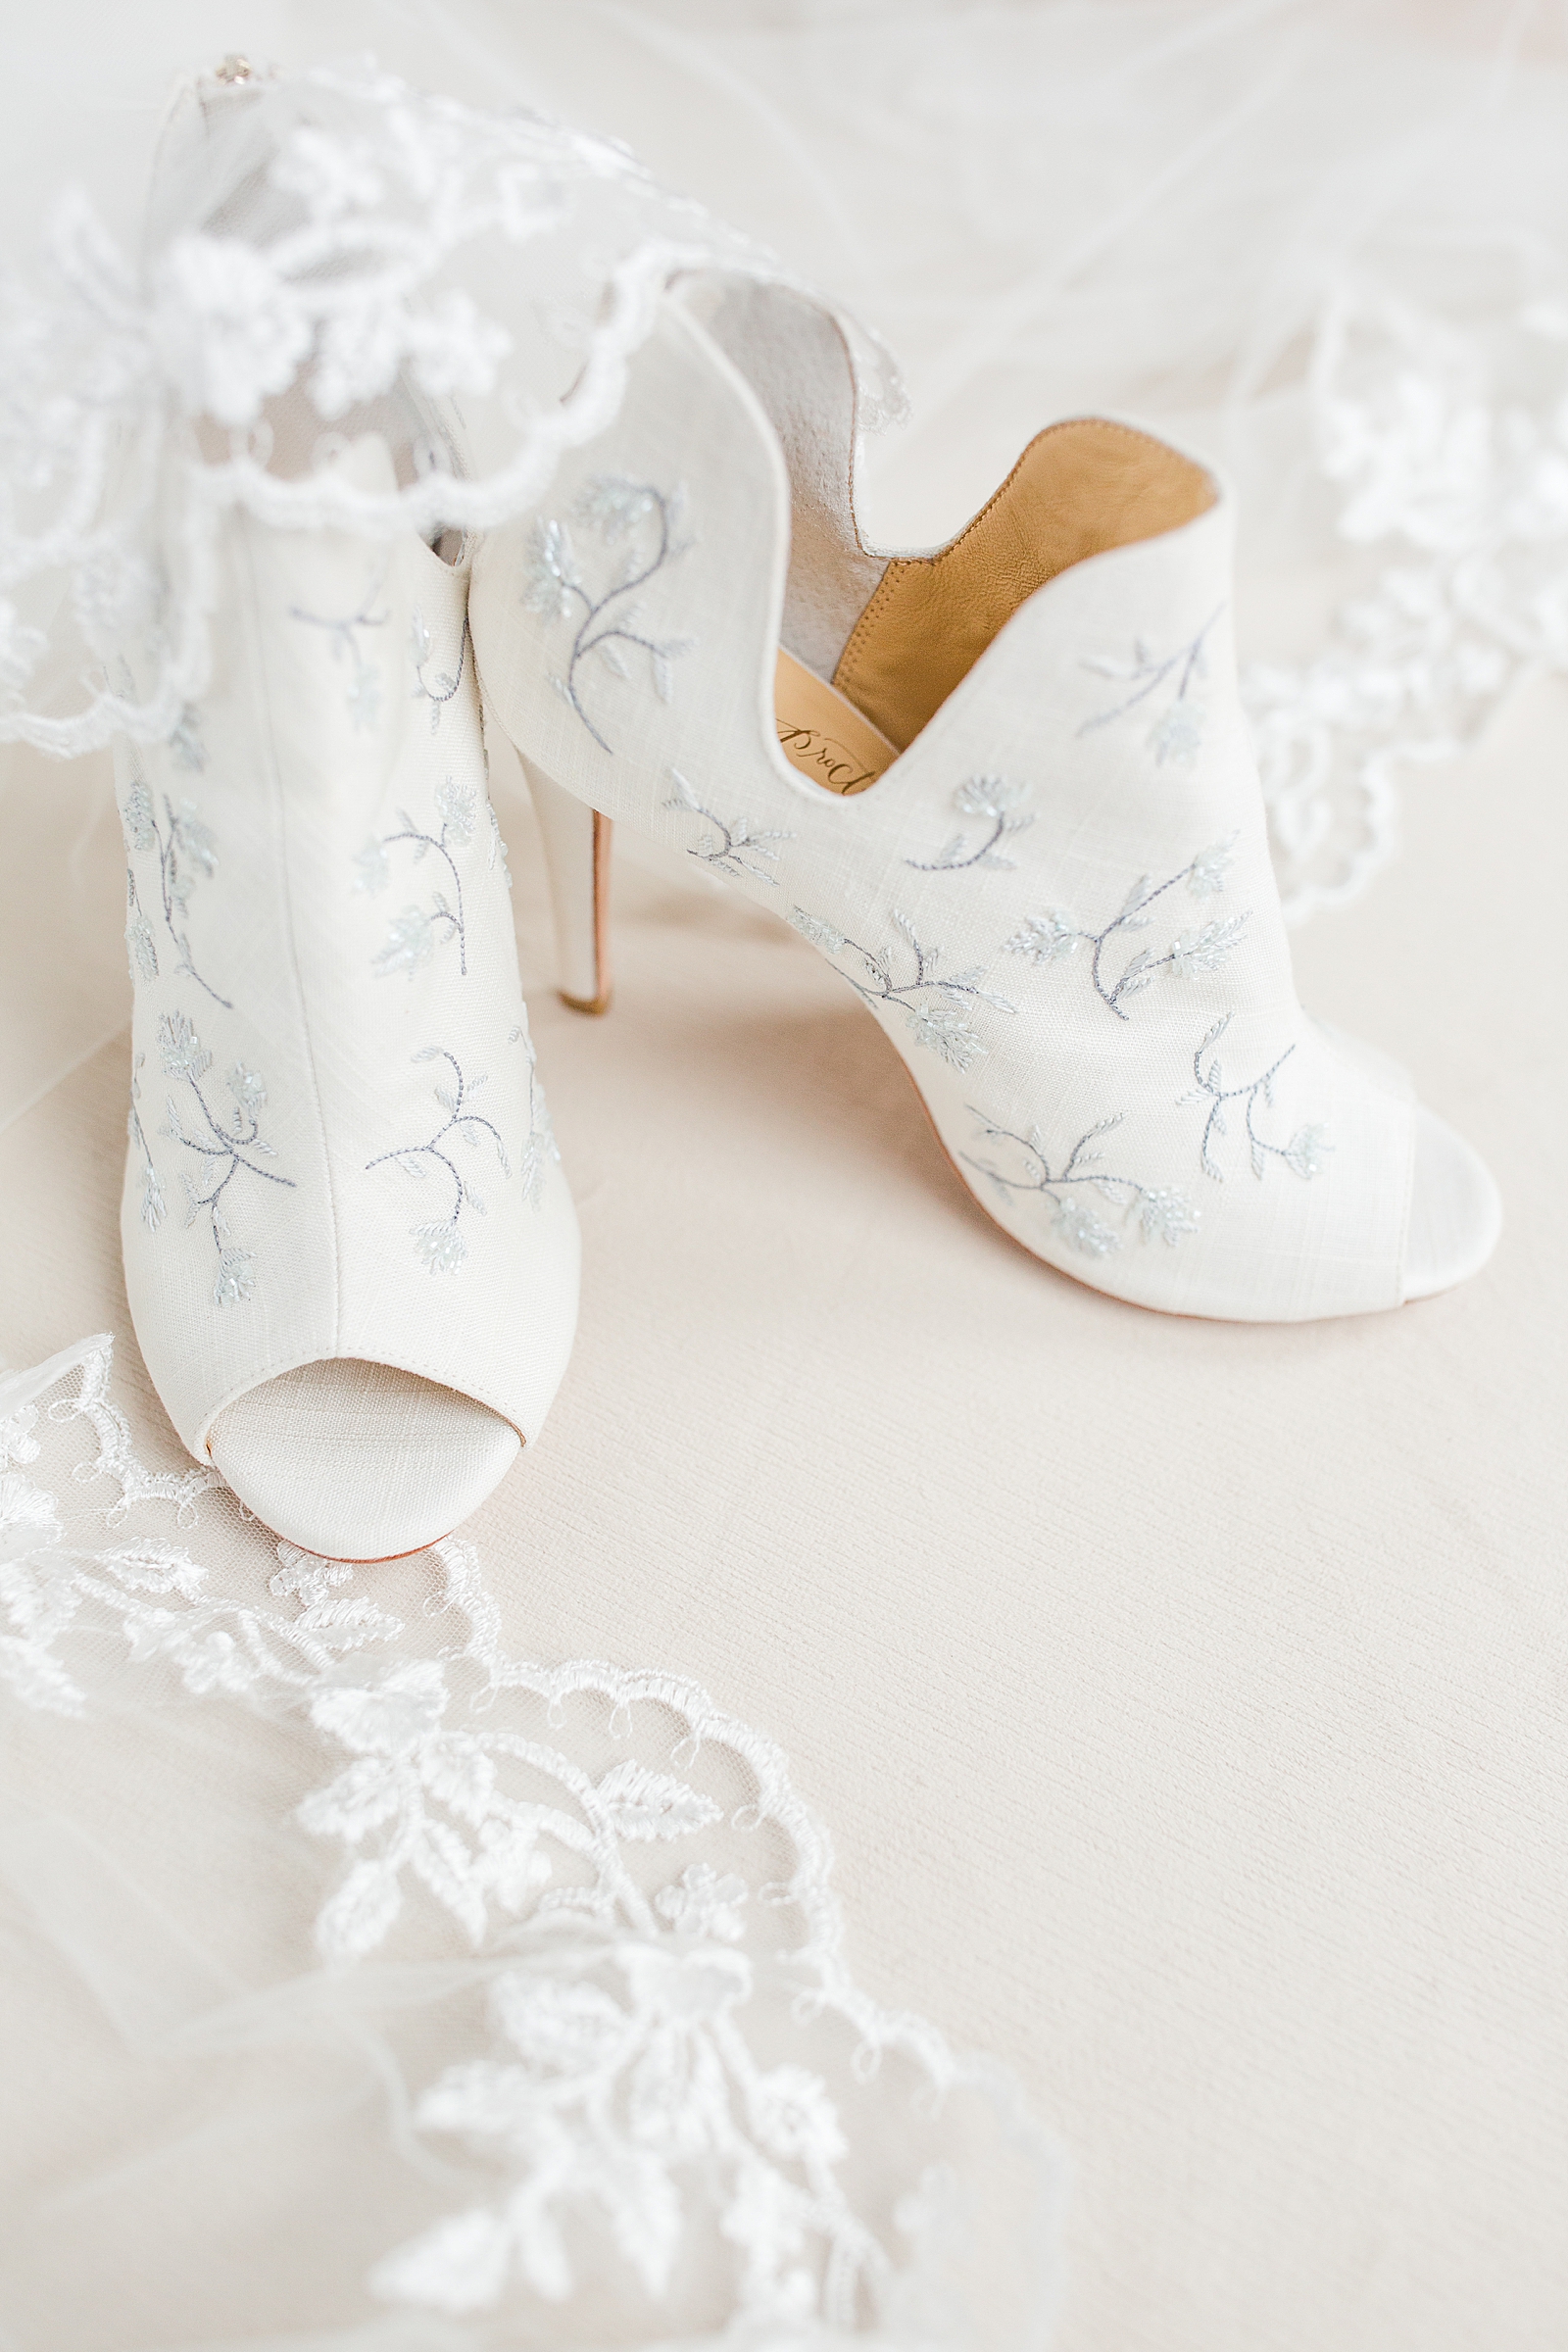 Hackney Warehouse Wedding White Bella Belle Booties with Blue Detail and White Veil Photo